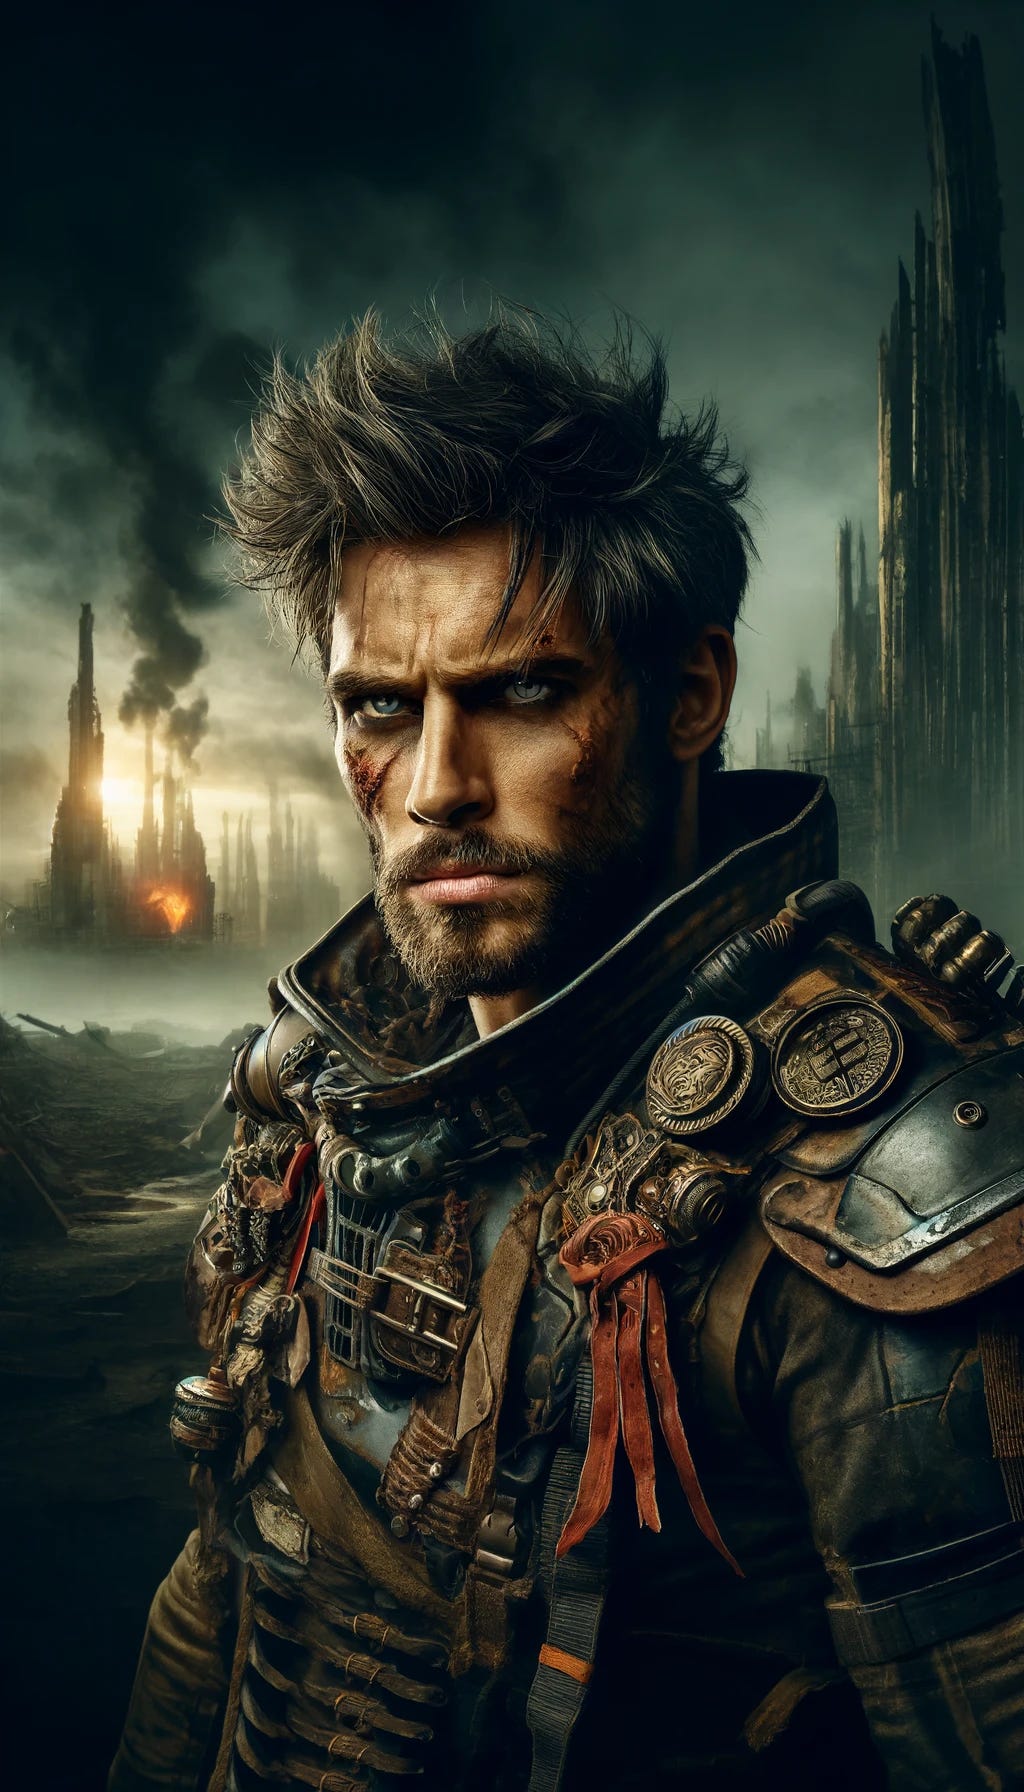 A fierce post-apocalyptic warlord, looking terrifying yet handsome. He has rugged, chiseled features with a strong jawline and piercing eyes. His attire is a mix of tattered, battle-worn armor and scavenged high-tech gear, adorned with trophies from past victories. His hair is wild and untamed, and he has scars and tattoos that add to his menacing appearance. The background is a desolate, ruined cityscape, with smoke and fire in the distance, adding to the apocalyptic atmosphere.